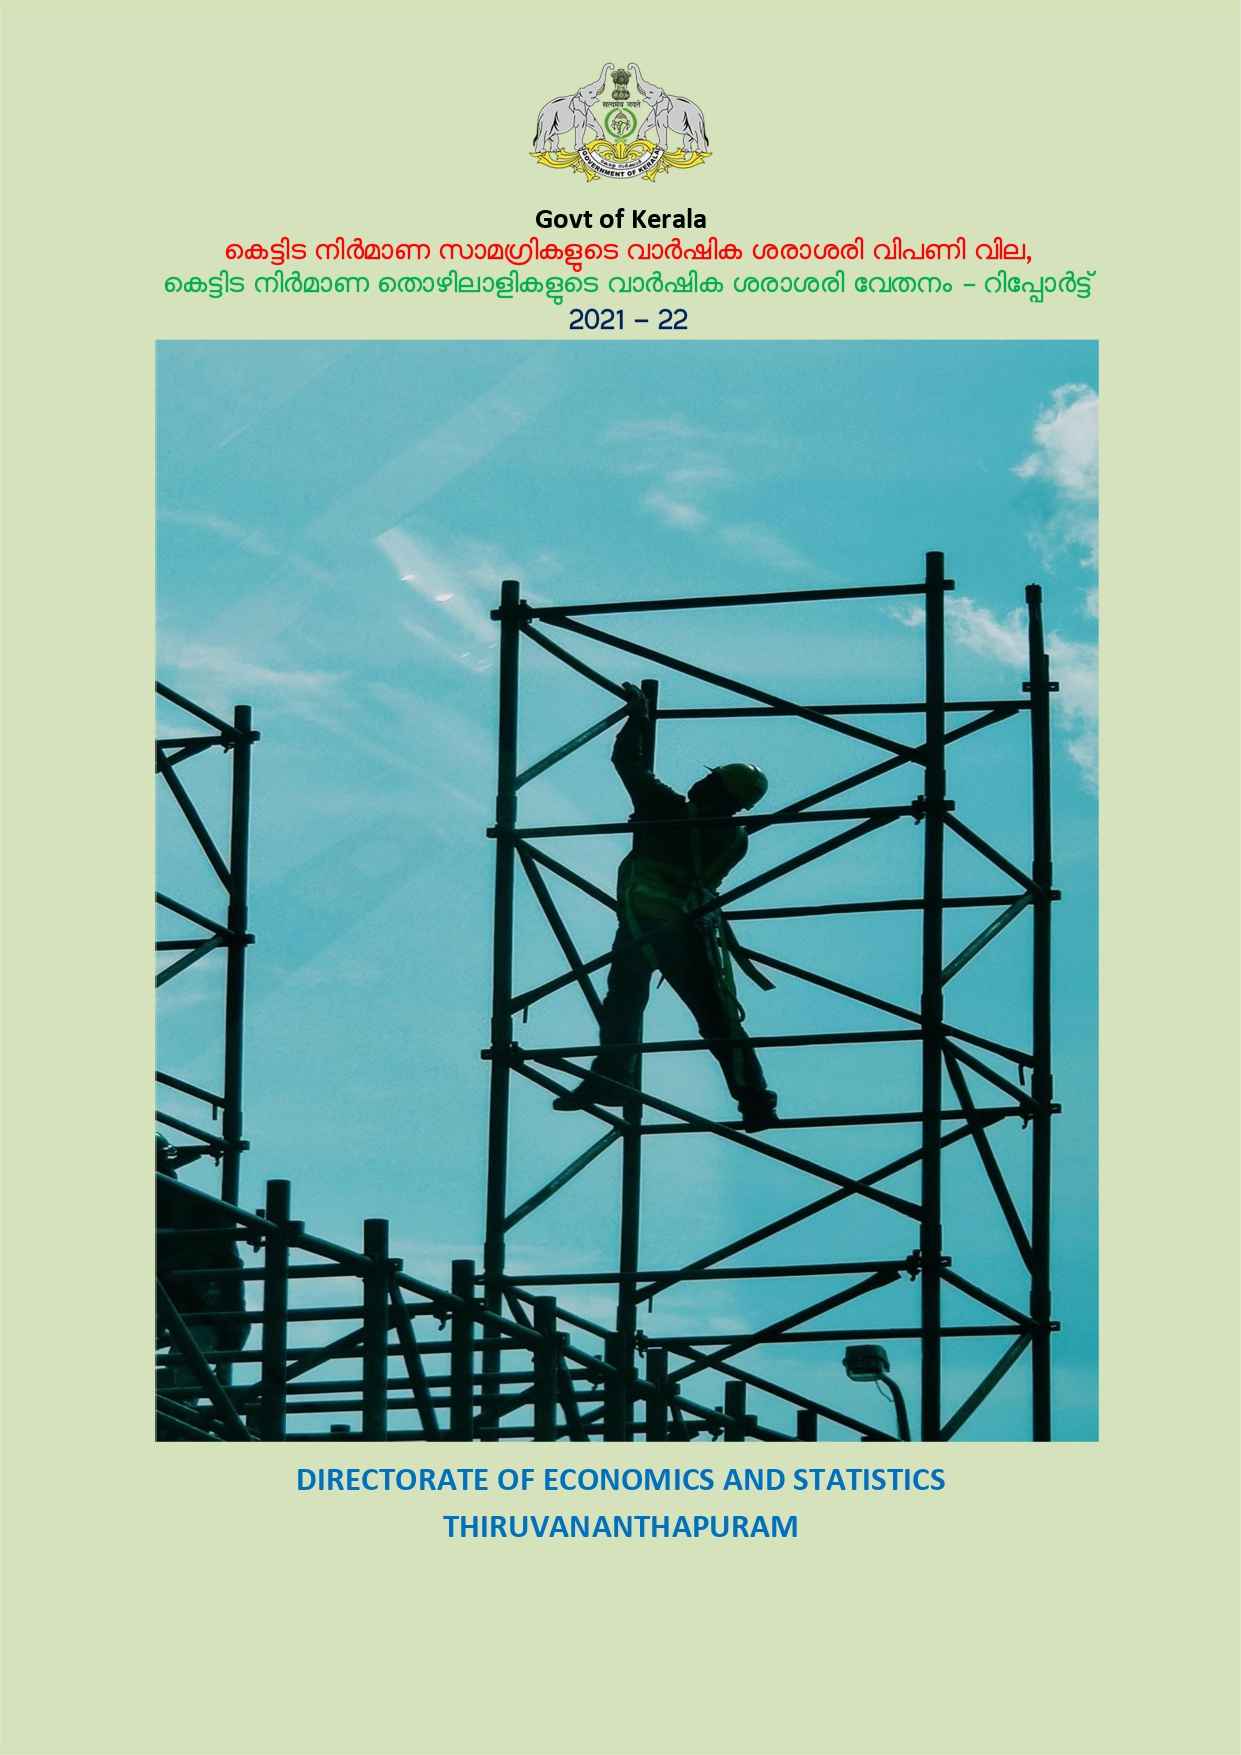 Report on Annual Average Market Price of Building Materials and Annual Average Wages of Construction Workers (2021-22)